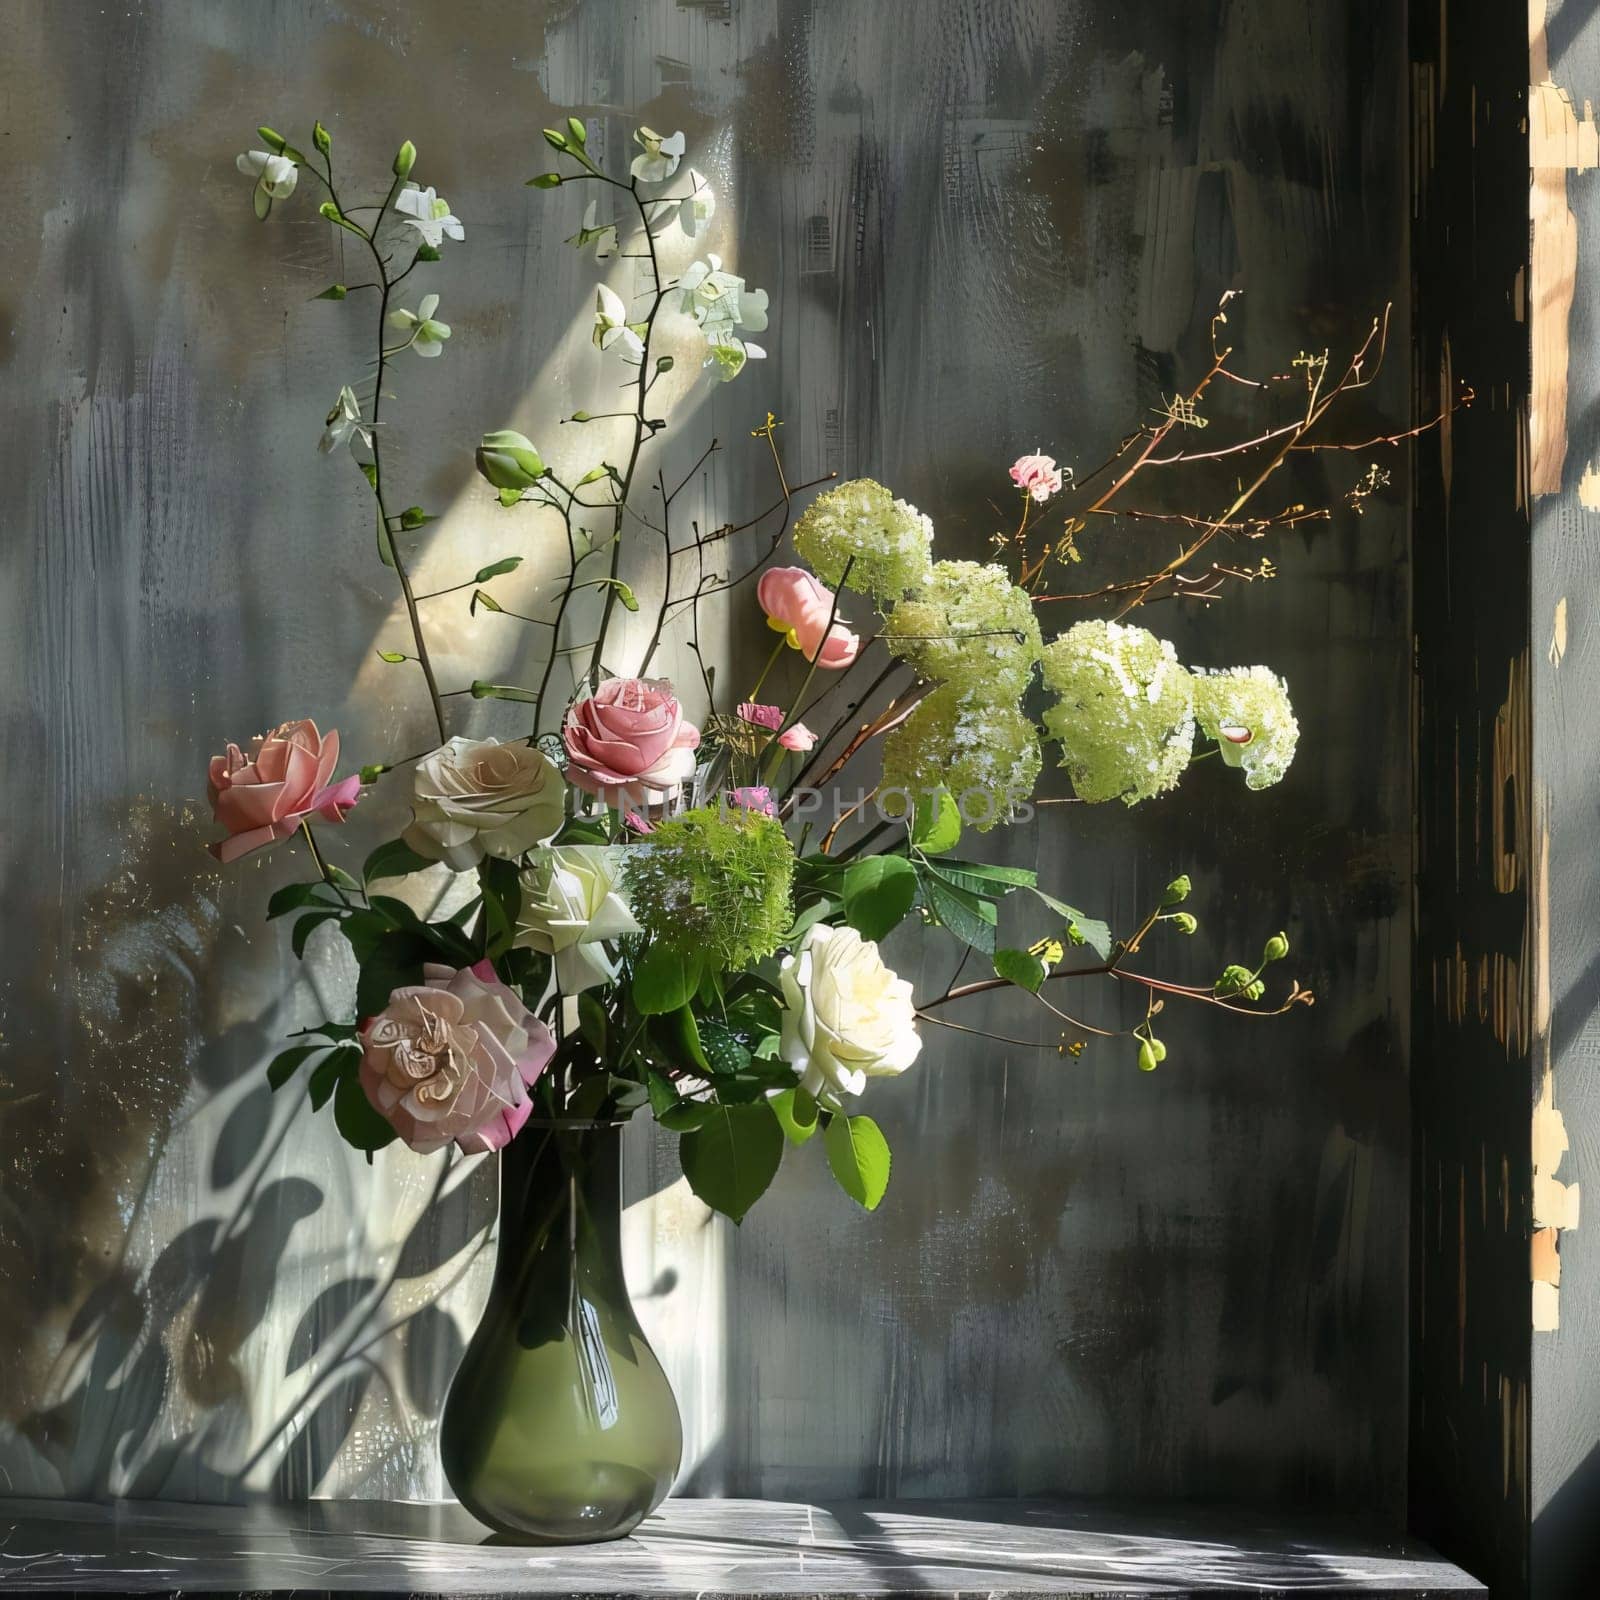 Green vase with bright flowers, roses on a dark background. Flowering flowers, a symbol of spring, new life. A joyful time of nature waking up to life.